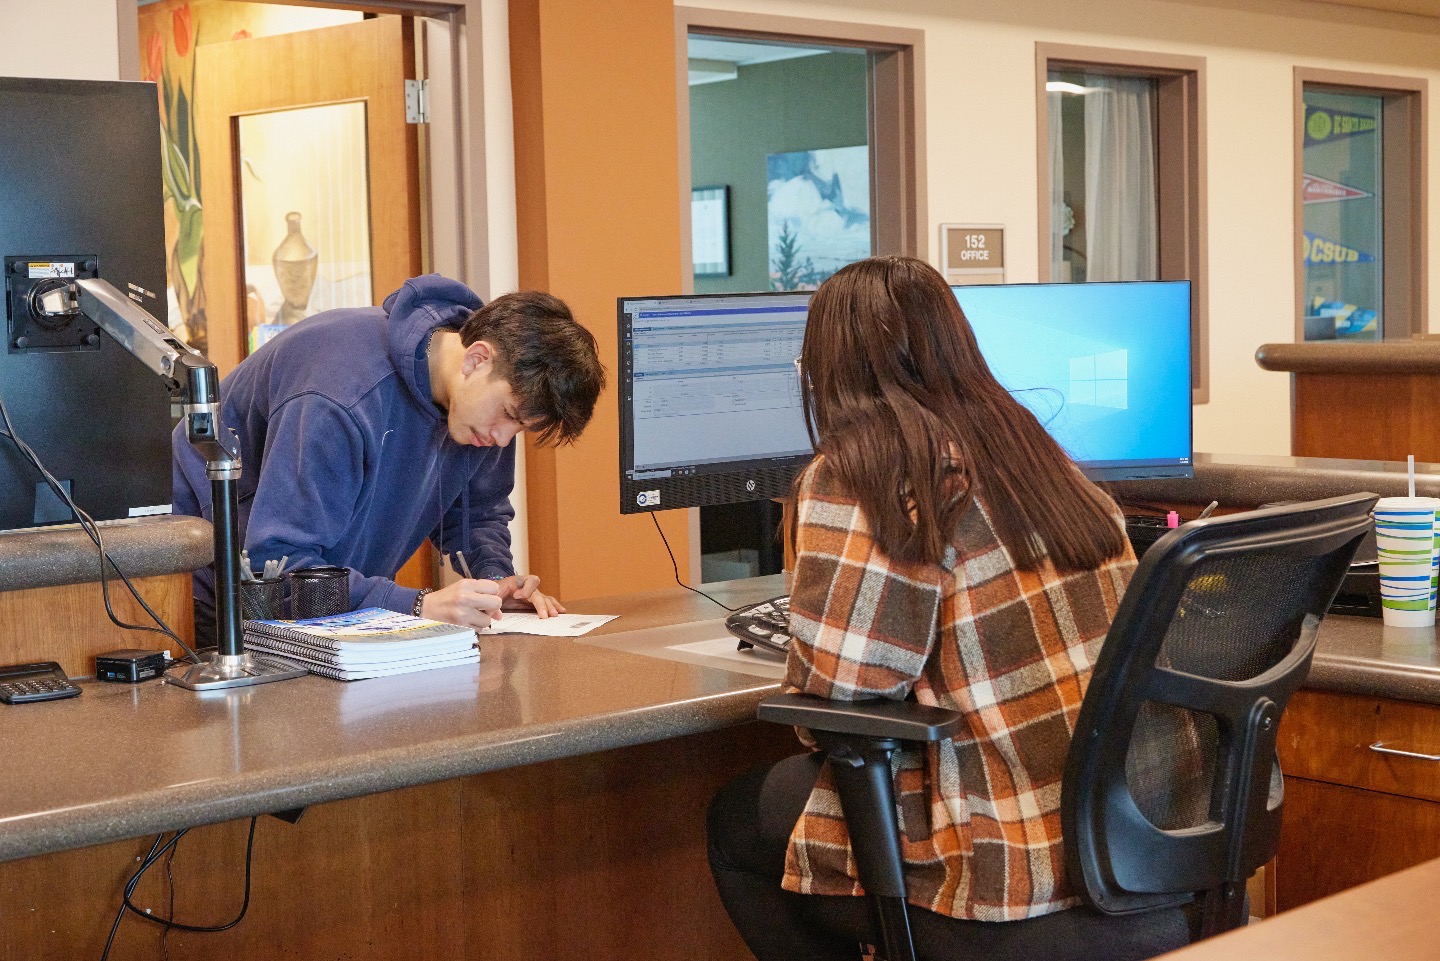 Student fills out paperwork at Financial Aid Desk